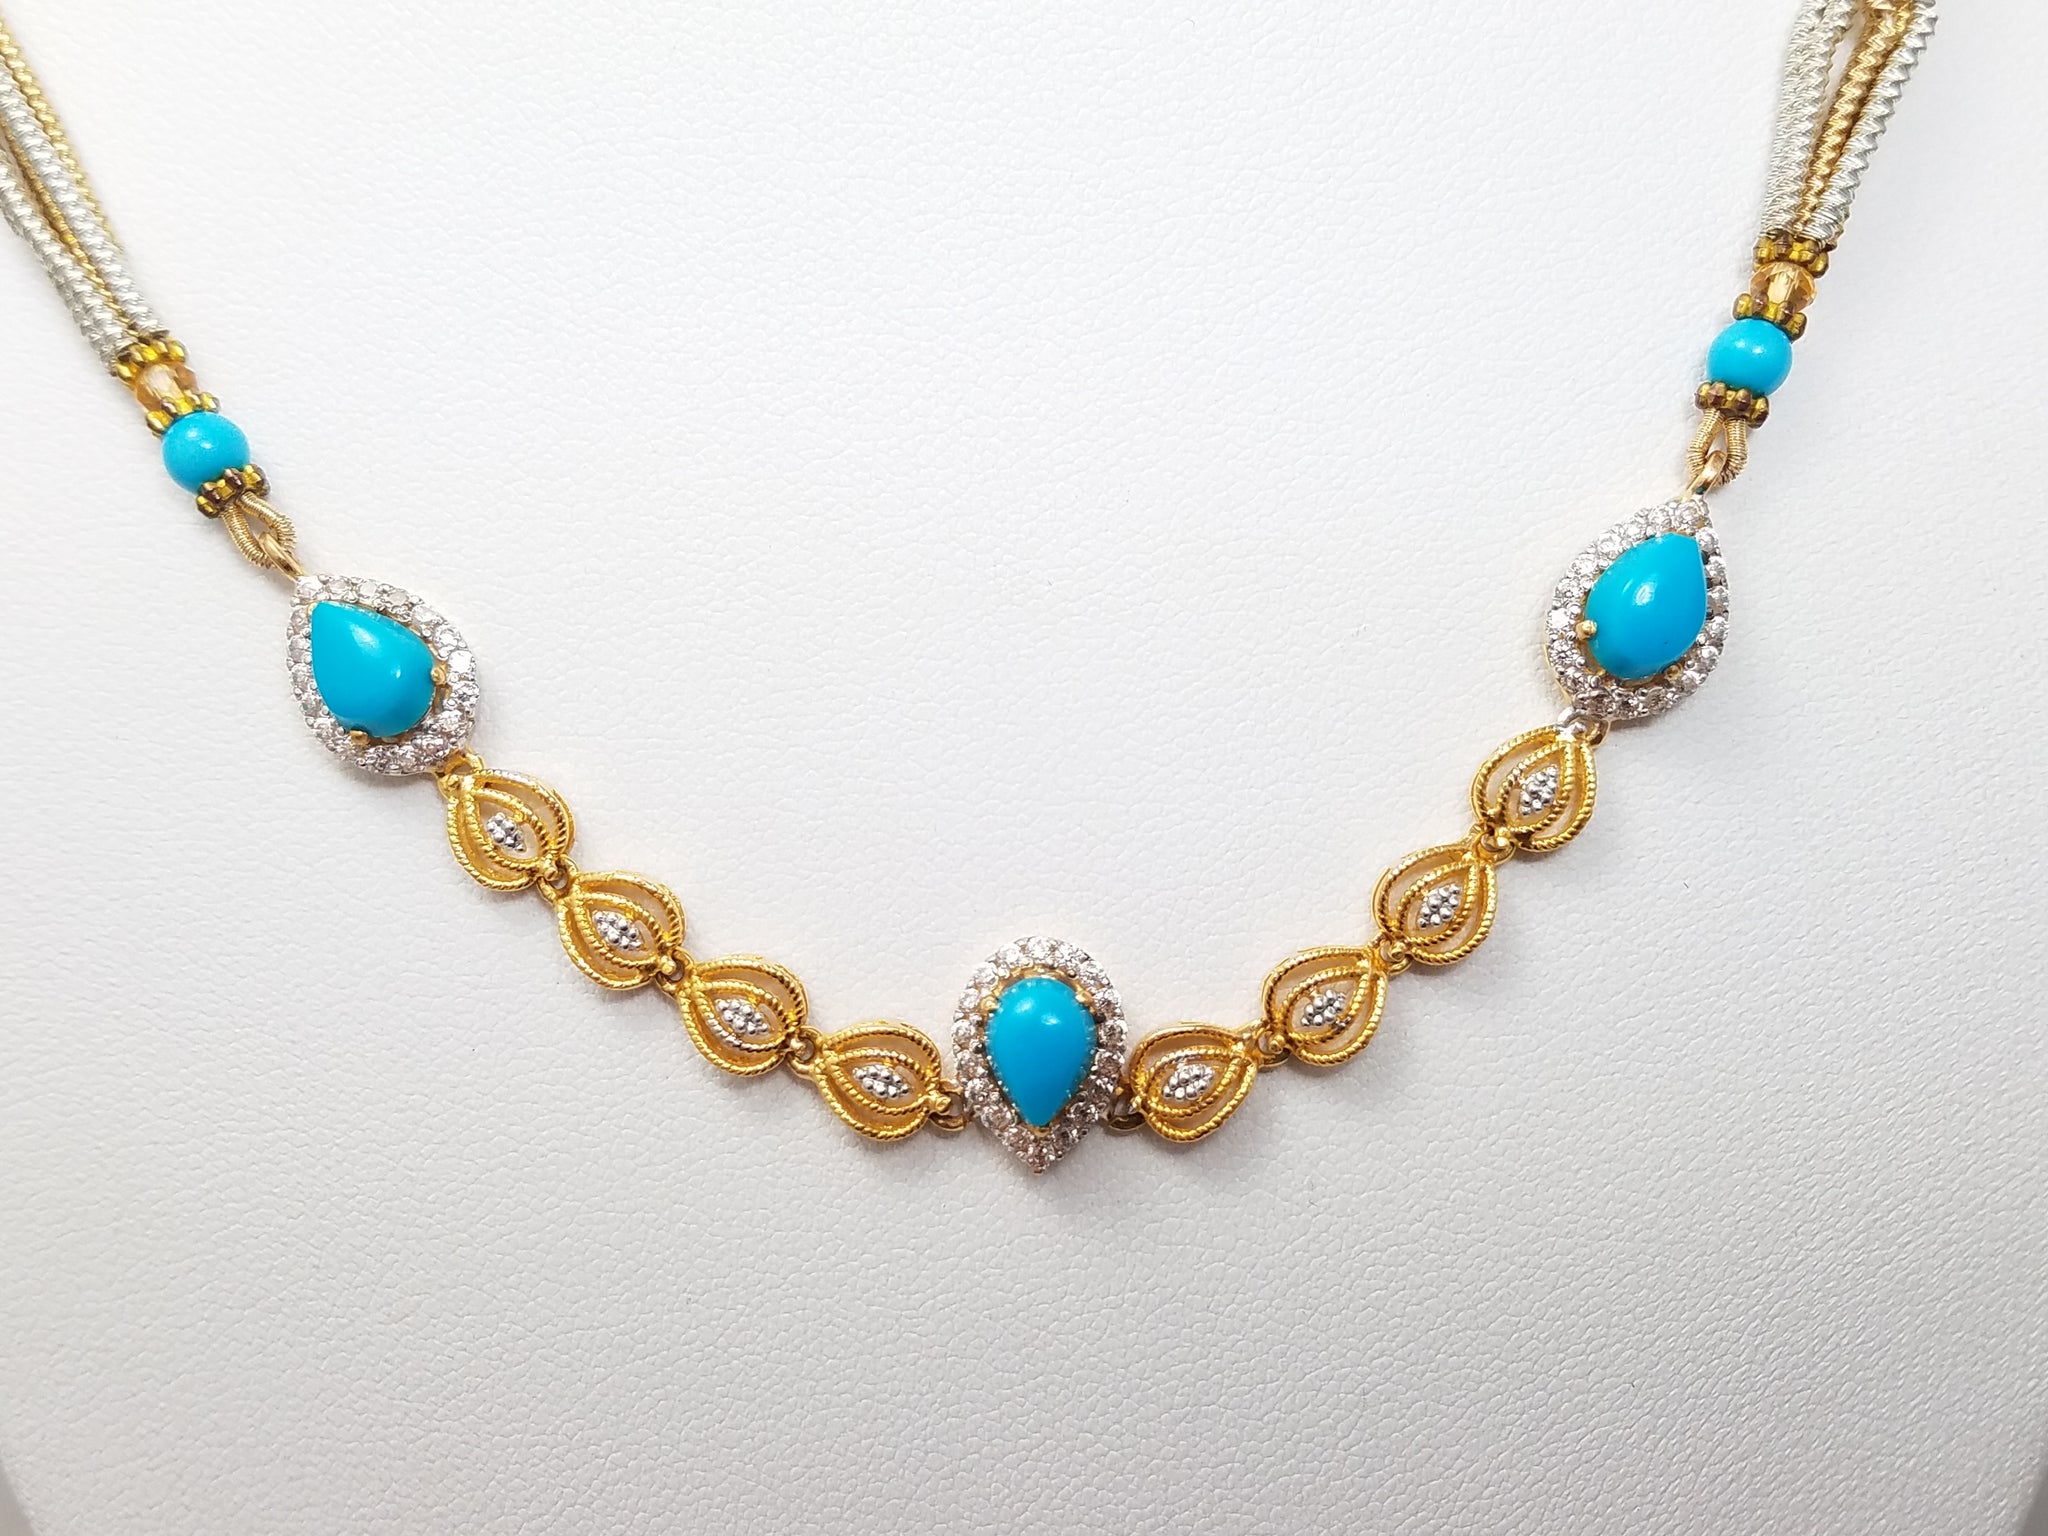 22k Yellow Gold Turquoise Necklace Earring Set